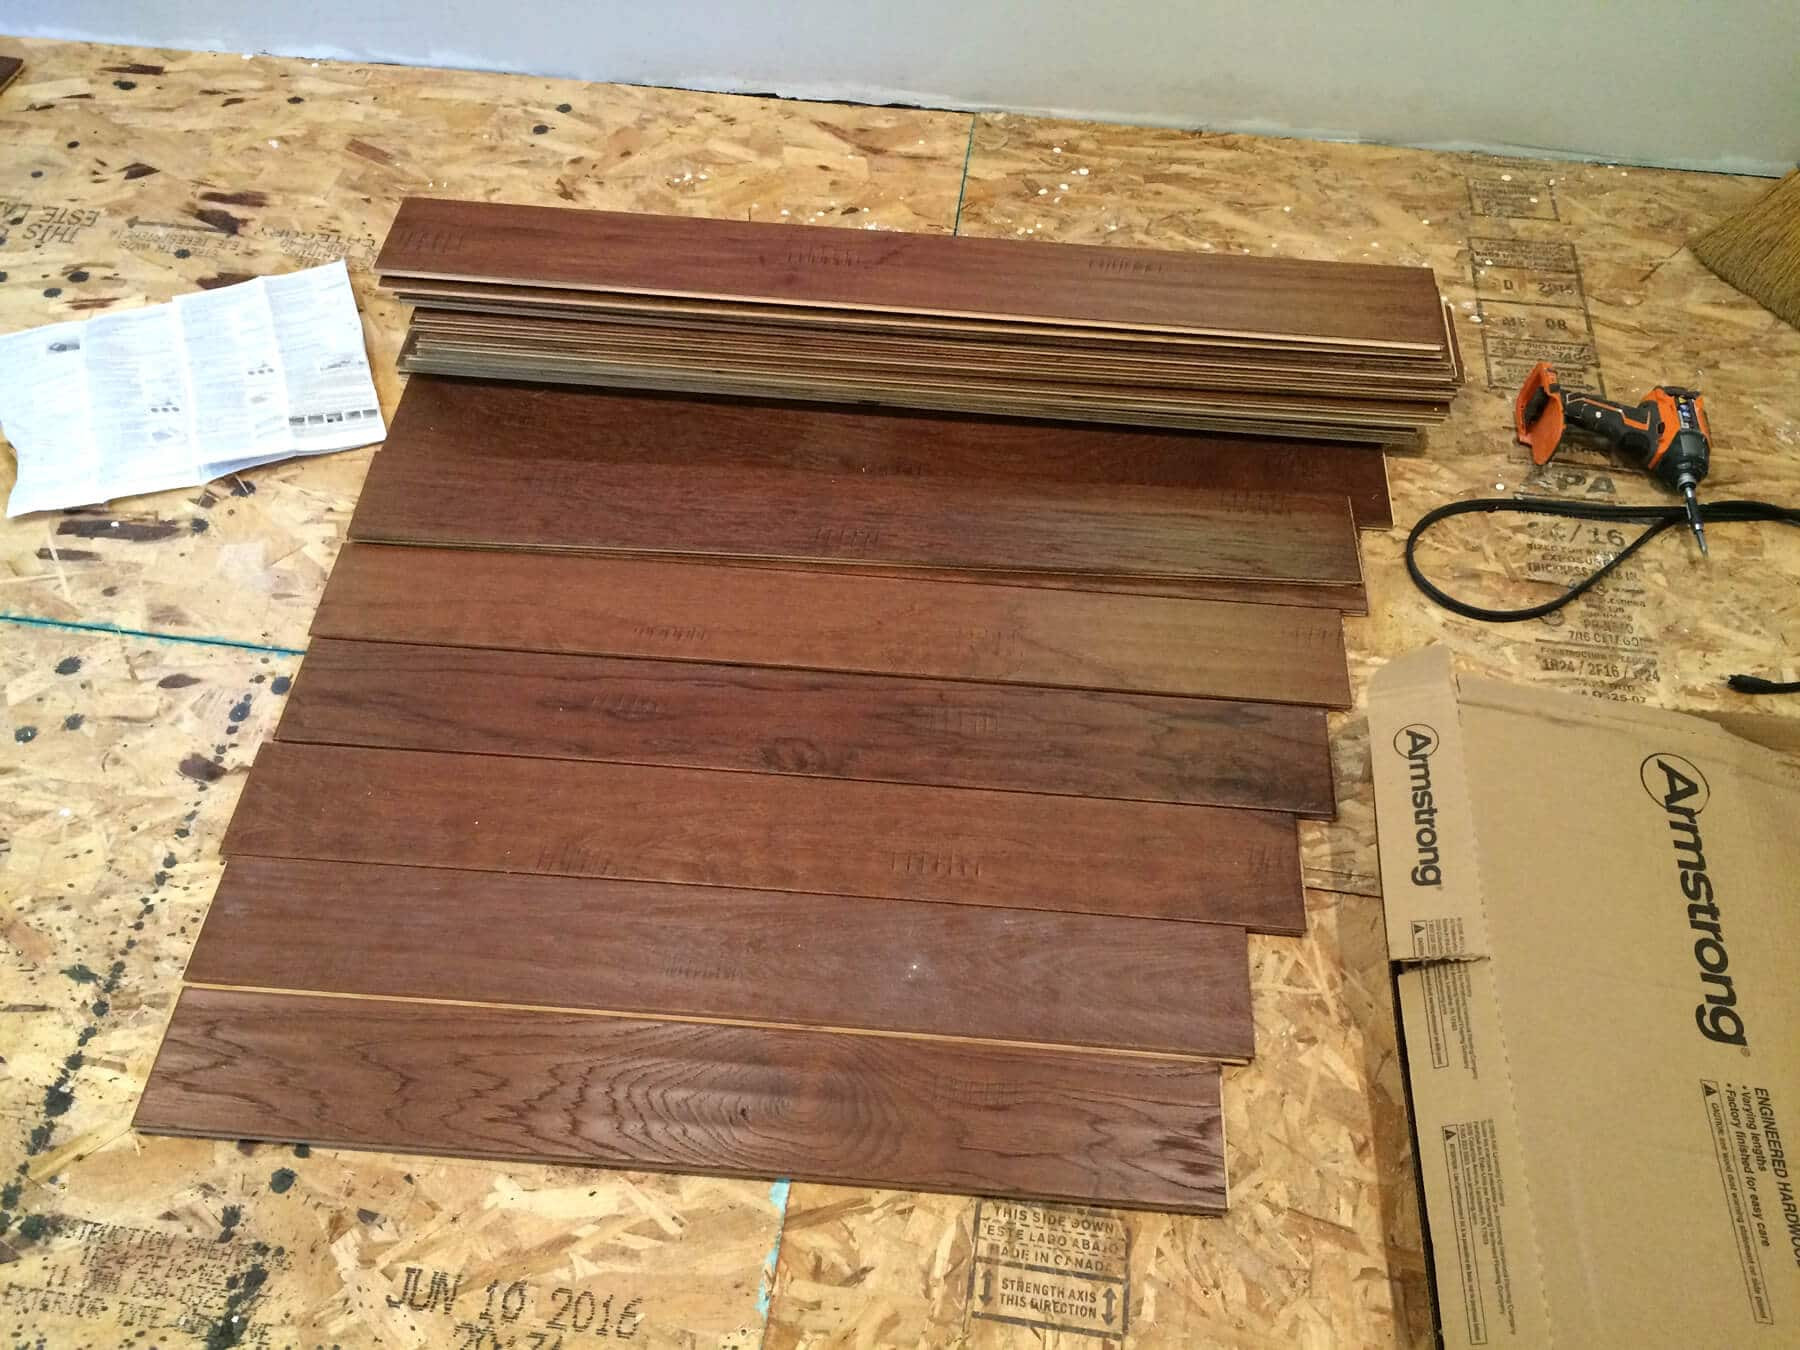 11 Unique Can You Glue Down 3 4 Inch Hardwood Flooring 2022 free download can you glue down 3 4 inch hardwood flooring of the micro dwelling project part 5 flooring the daring gourmet within thank you floor gods 3